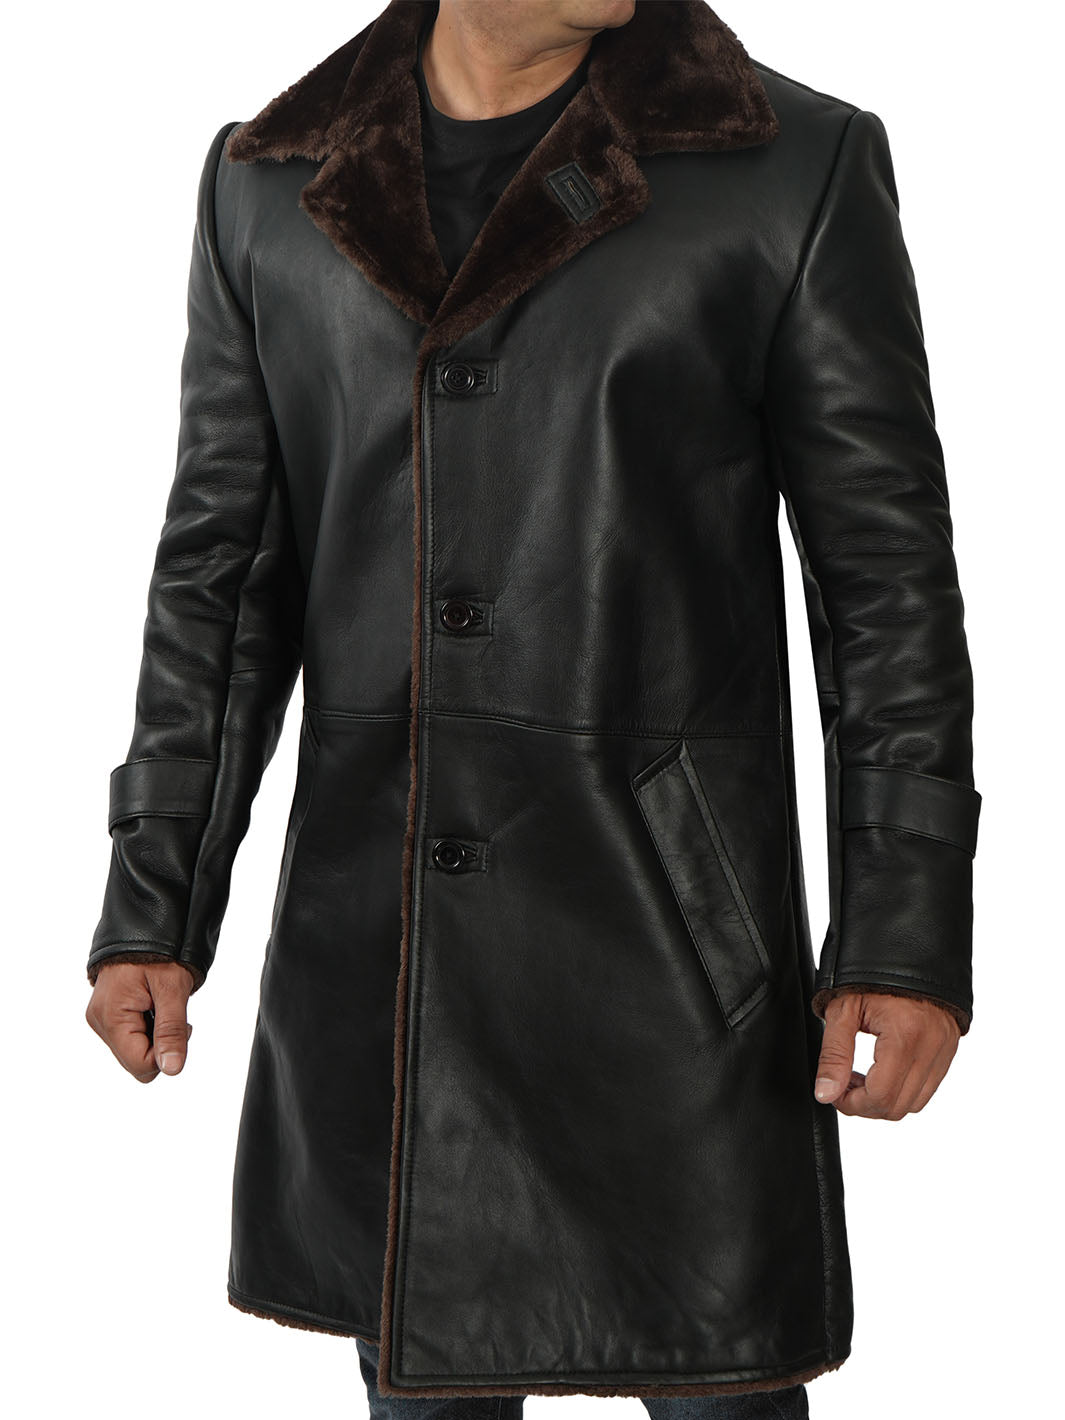 Mens shearling leather coat